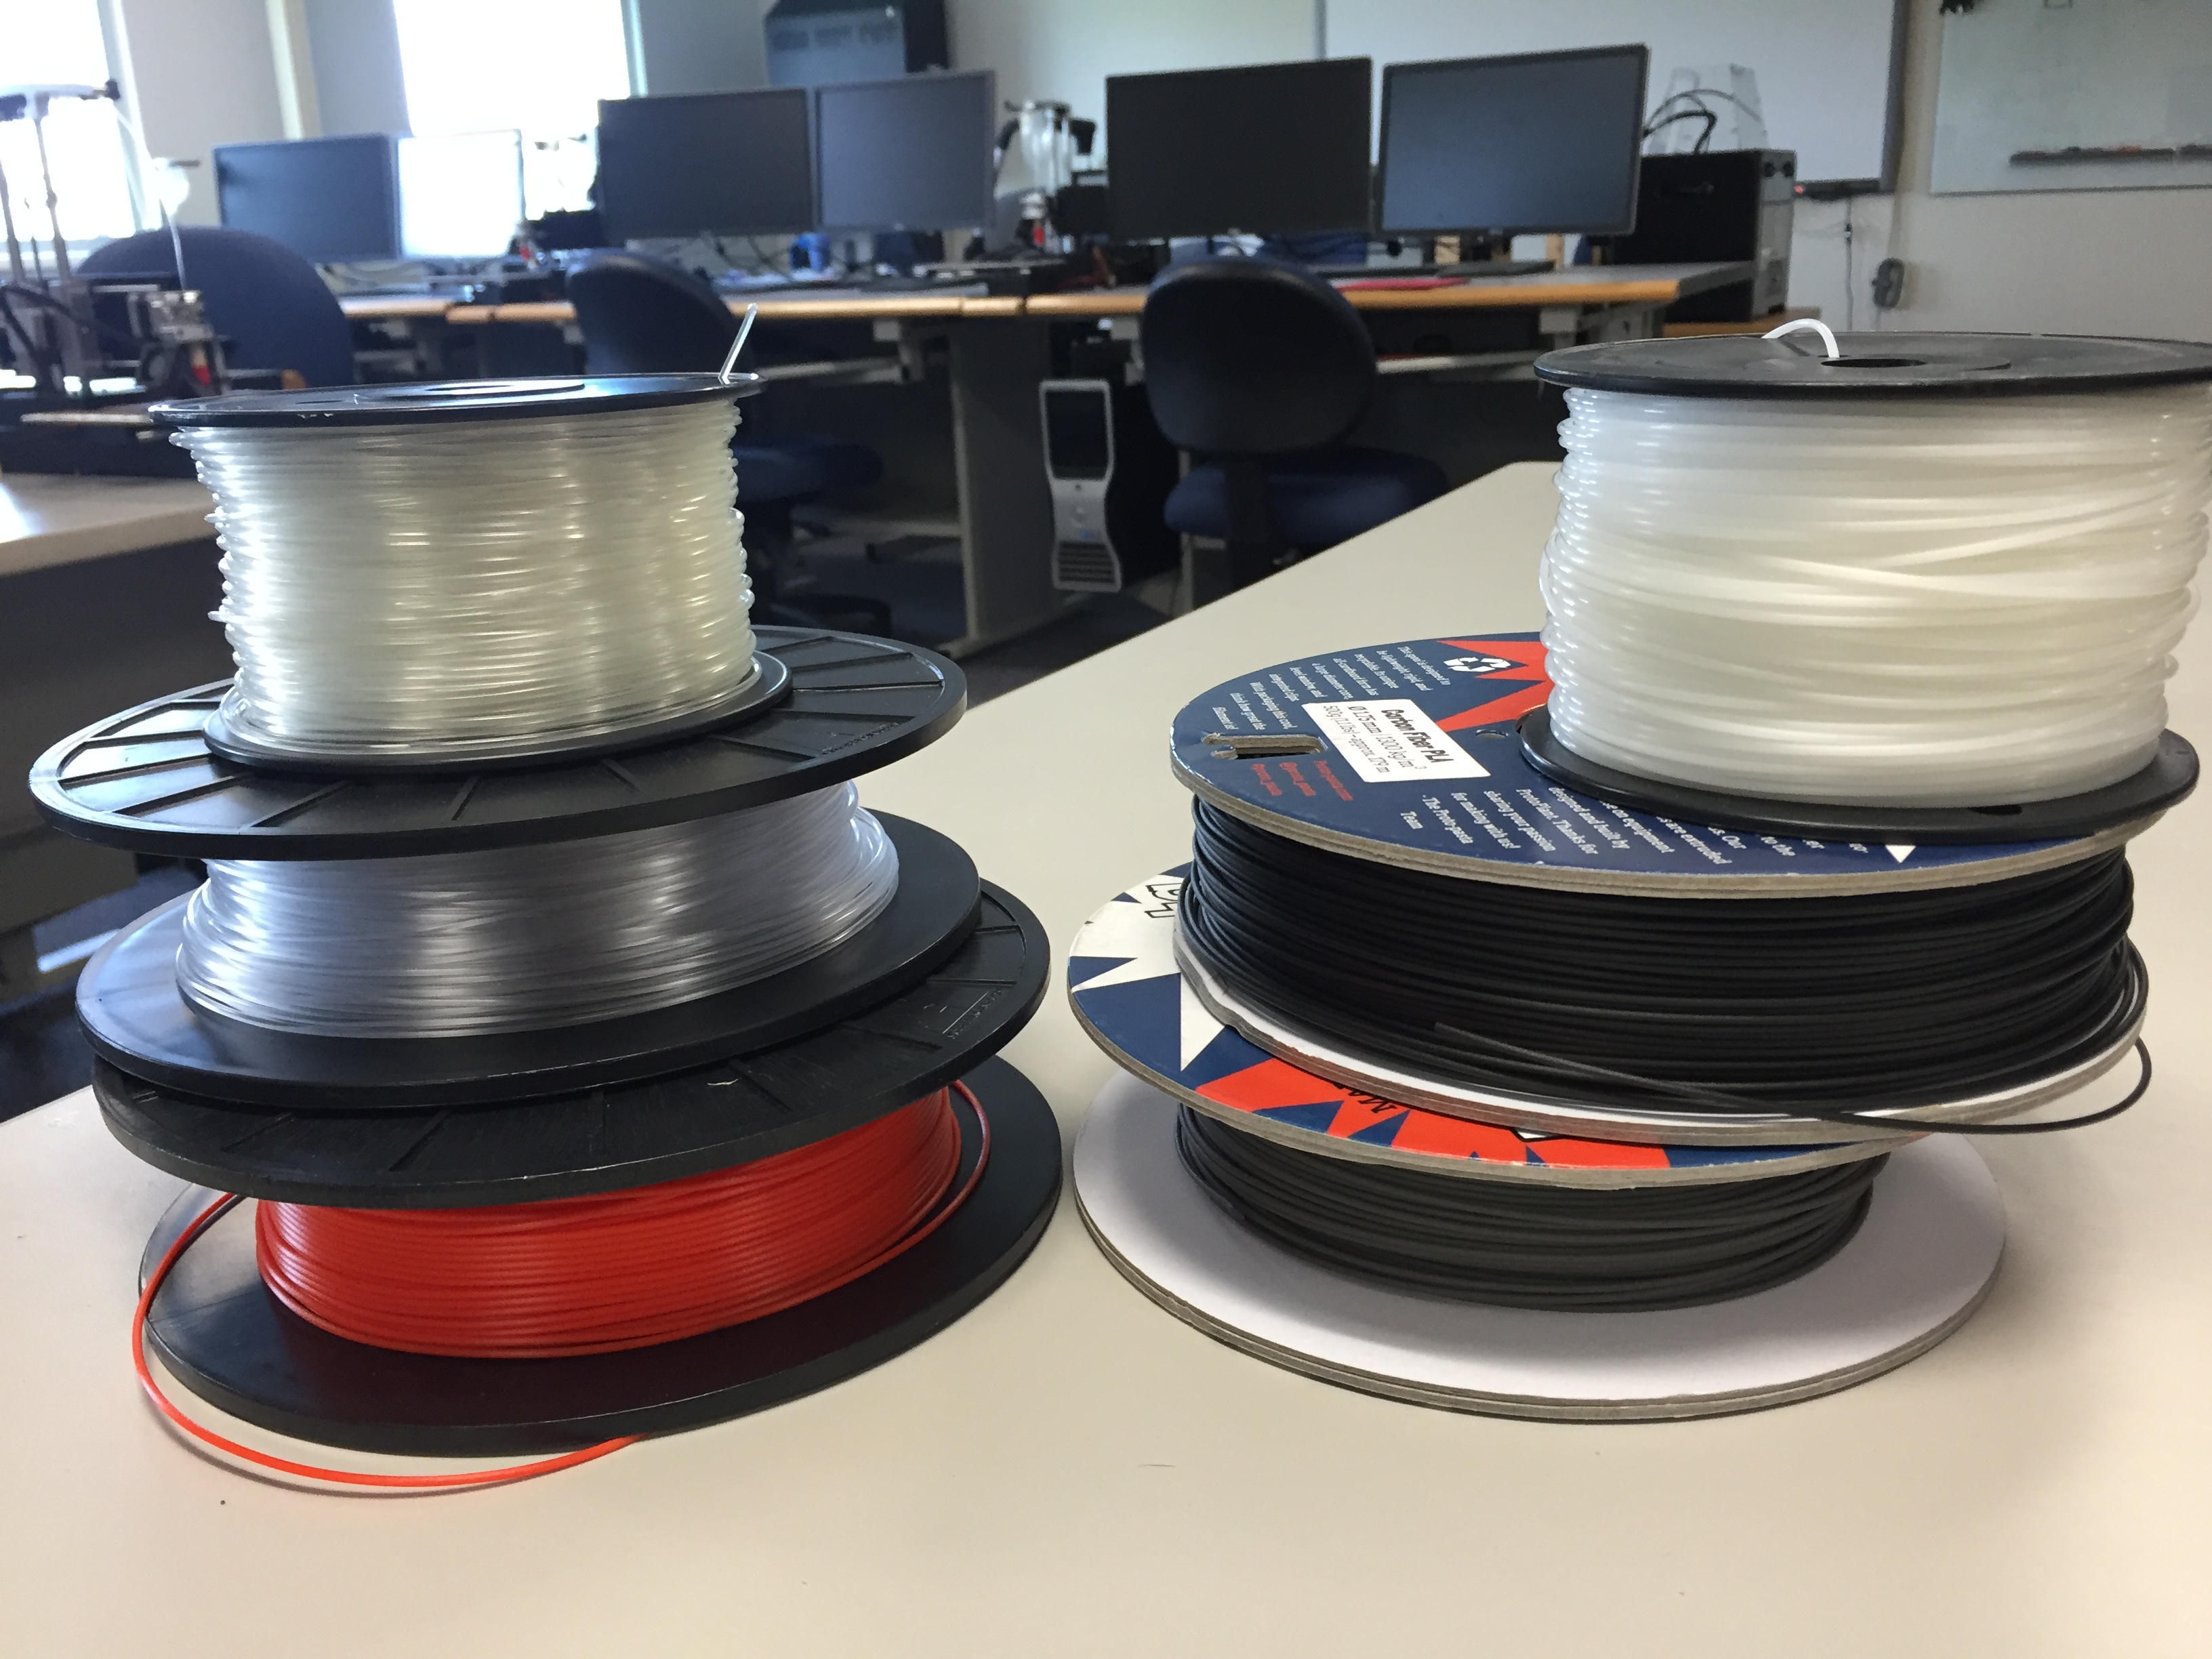 Spools for the 3-D printers (Photo by Robyne, KUAC - Fairbanks)